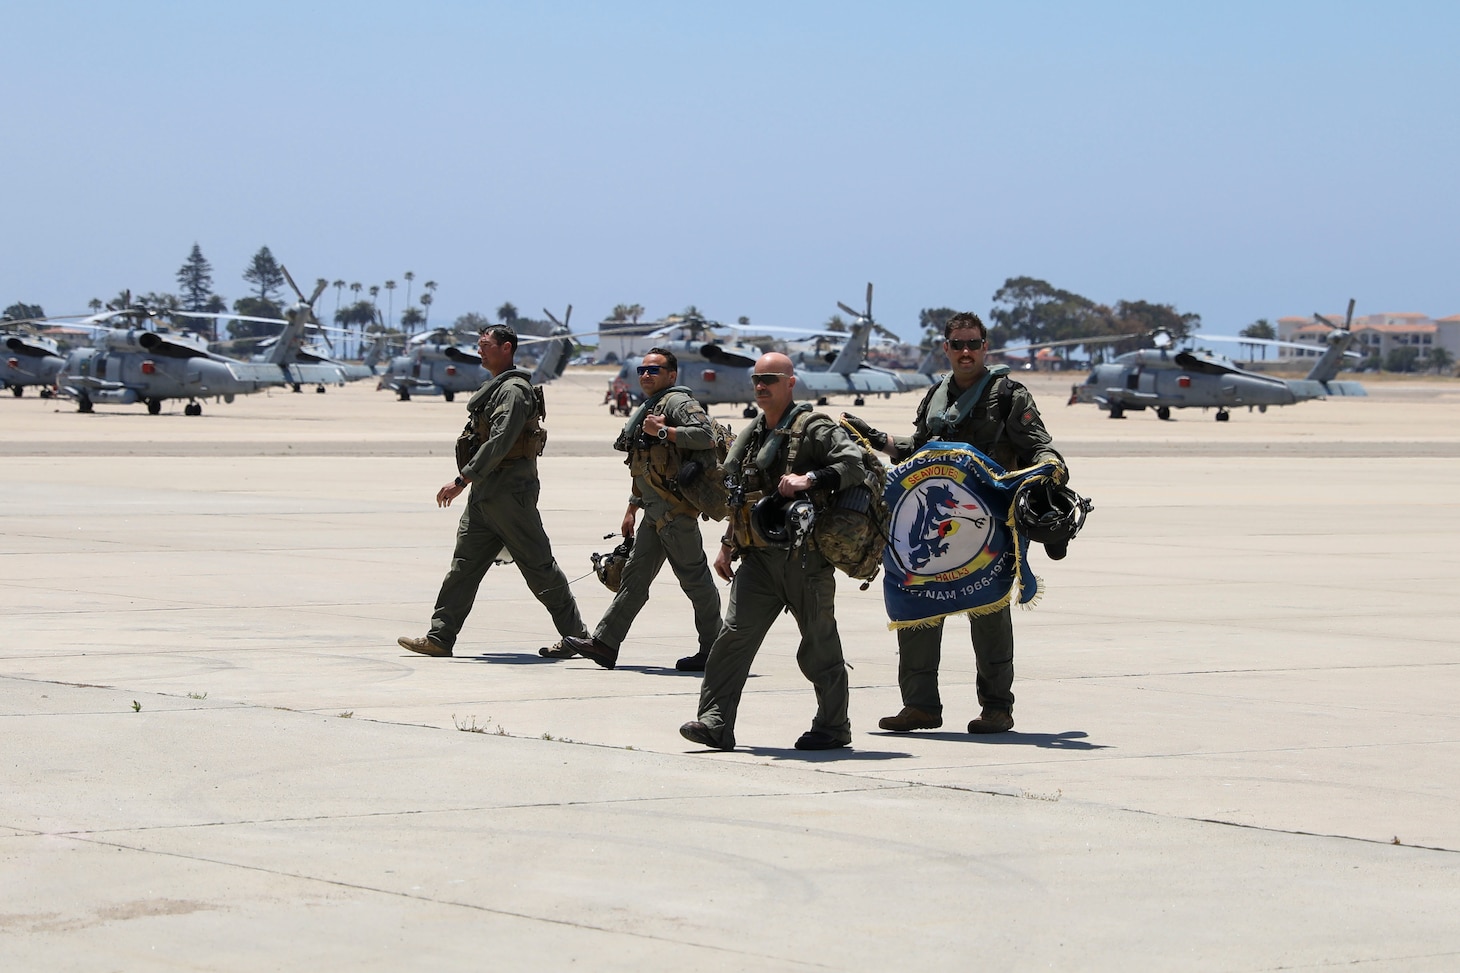 Sailors assigned to the "Firehawks" of Helicopter Sea Combat Squadron (HSC) 85 return to the squadron's hangar after the squadron's final flight, carrying the flag of their predecessor squadron, the "Seawolves" of Helicopter Attack Squadron (Light) 3.